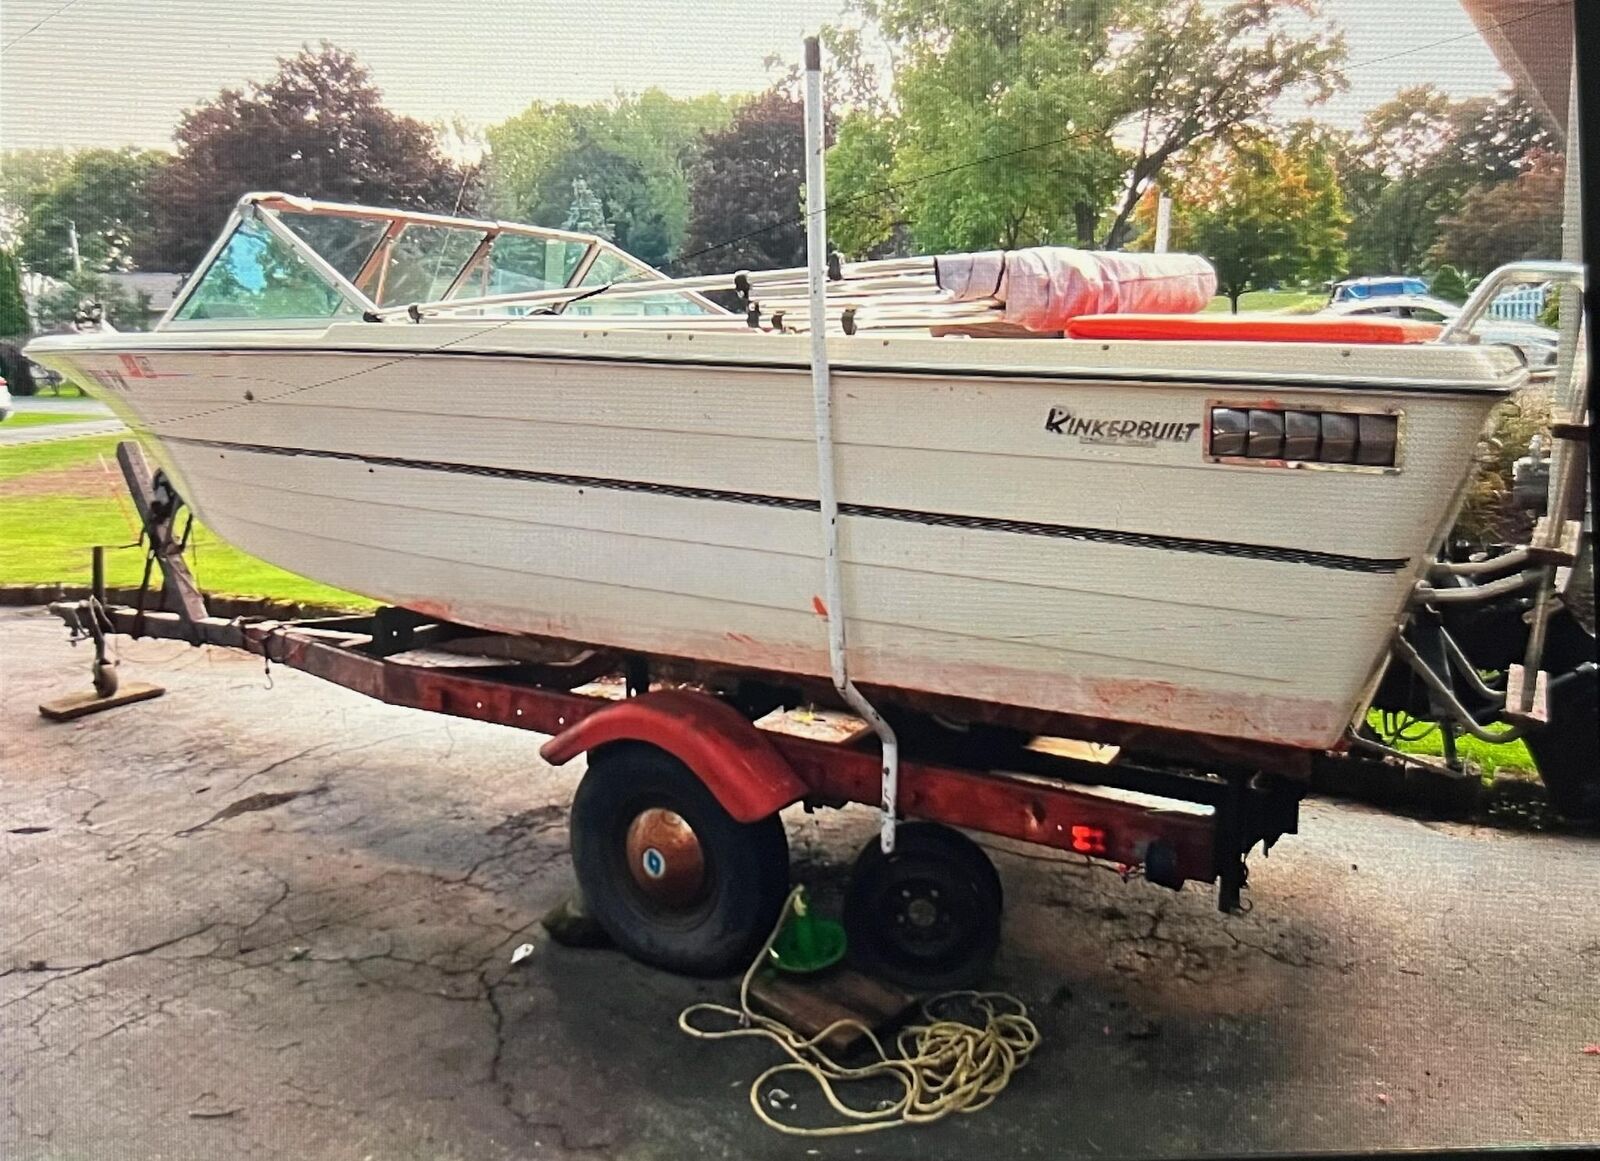 Rinker 18' Boat Located In Rochester, NY - Has Trailer